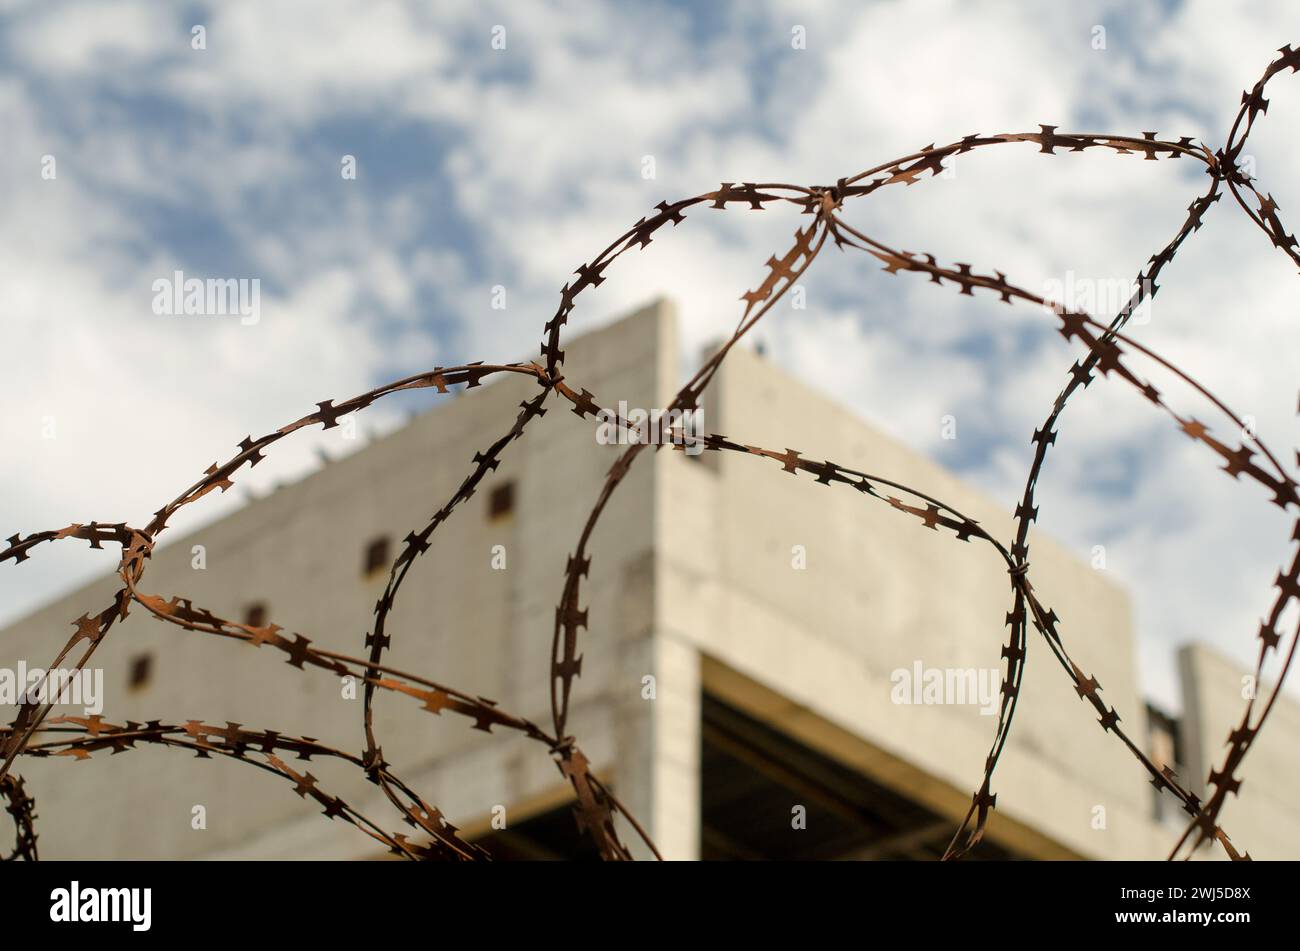 Rusty barbed wire fence against the backdrop of an abandoned bui Stock Photo